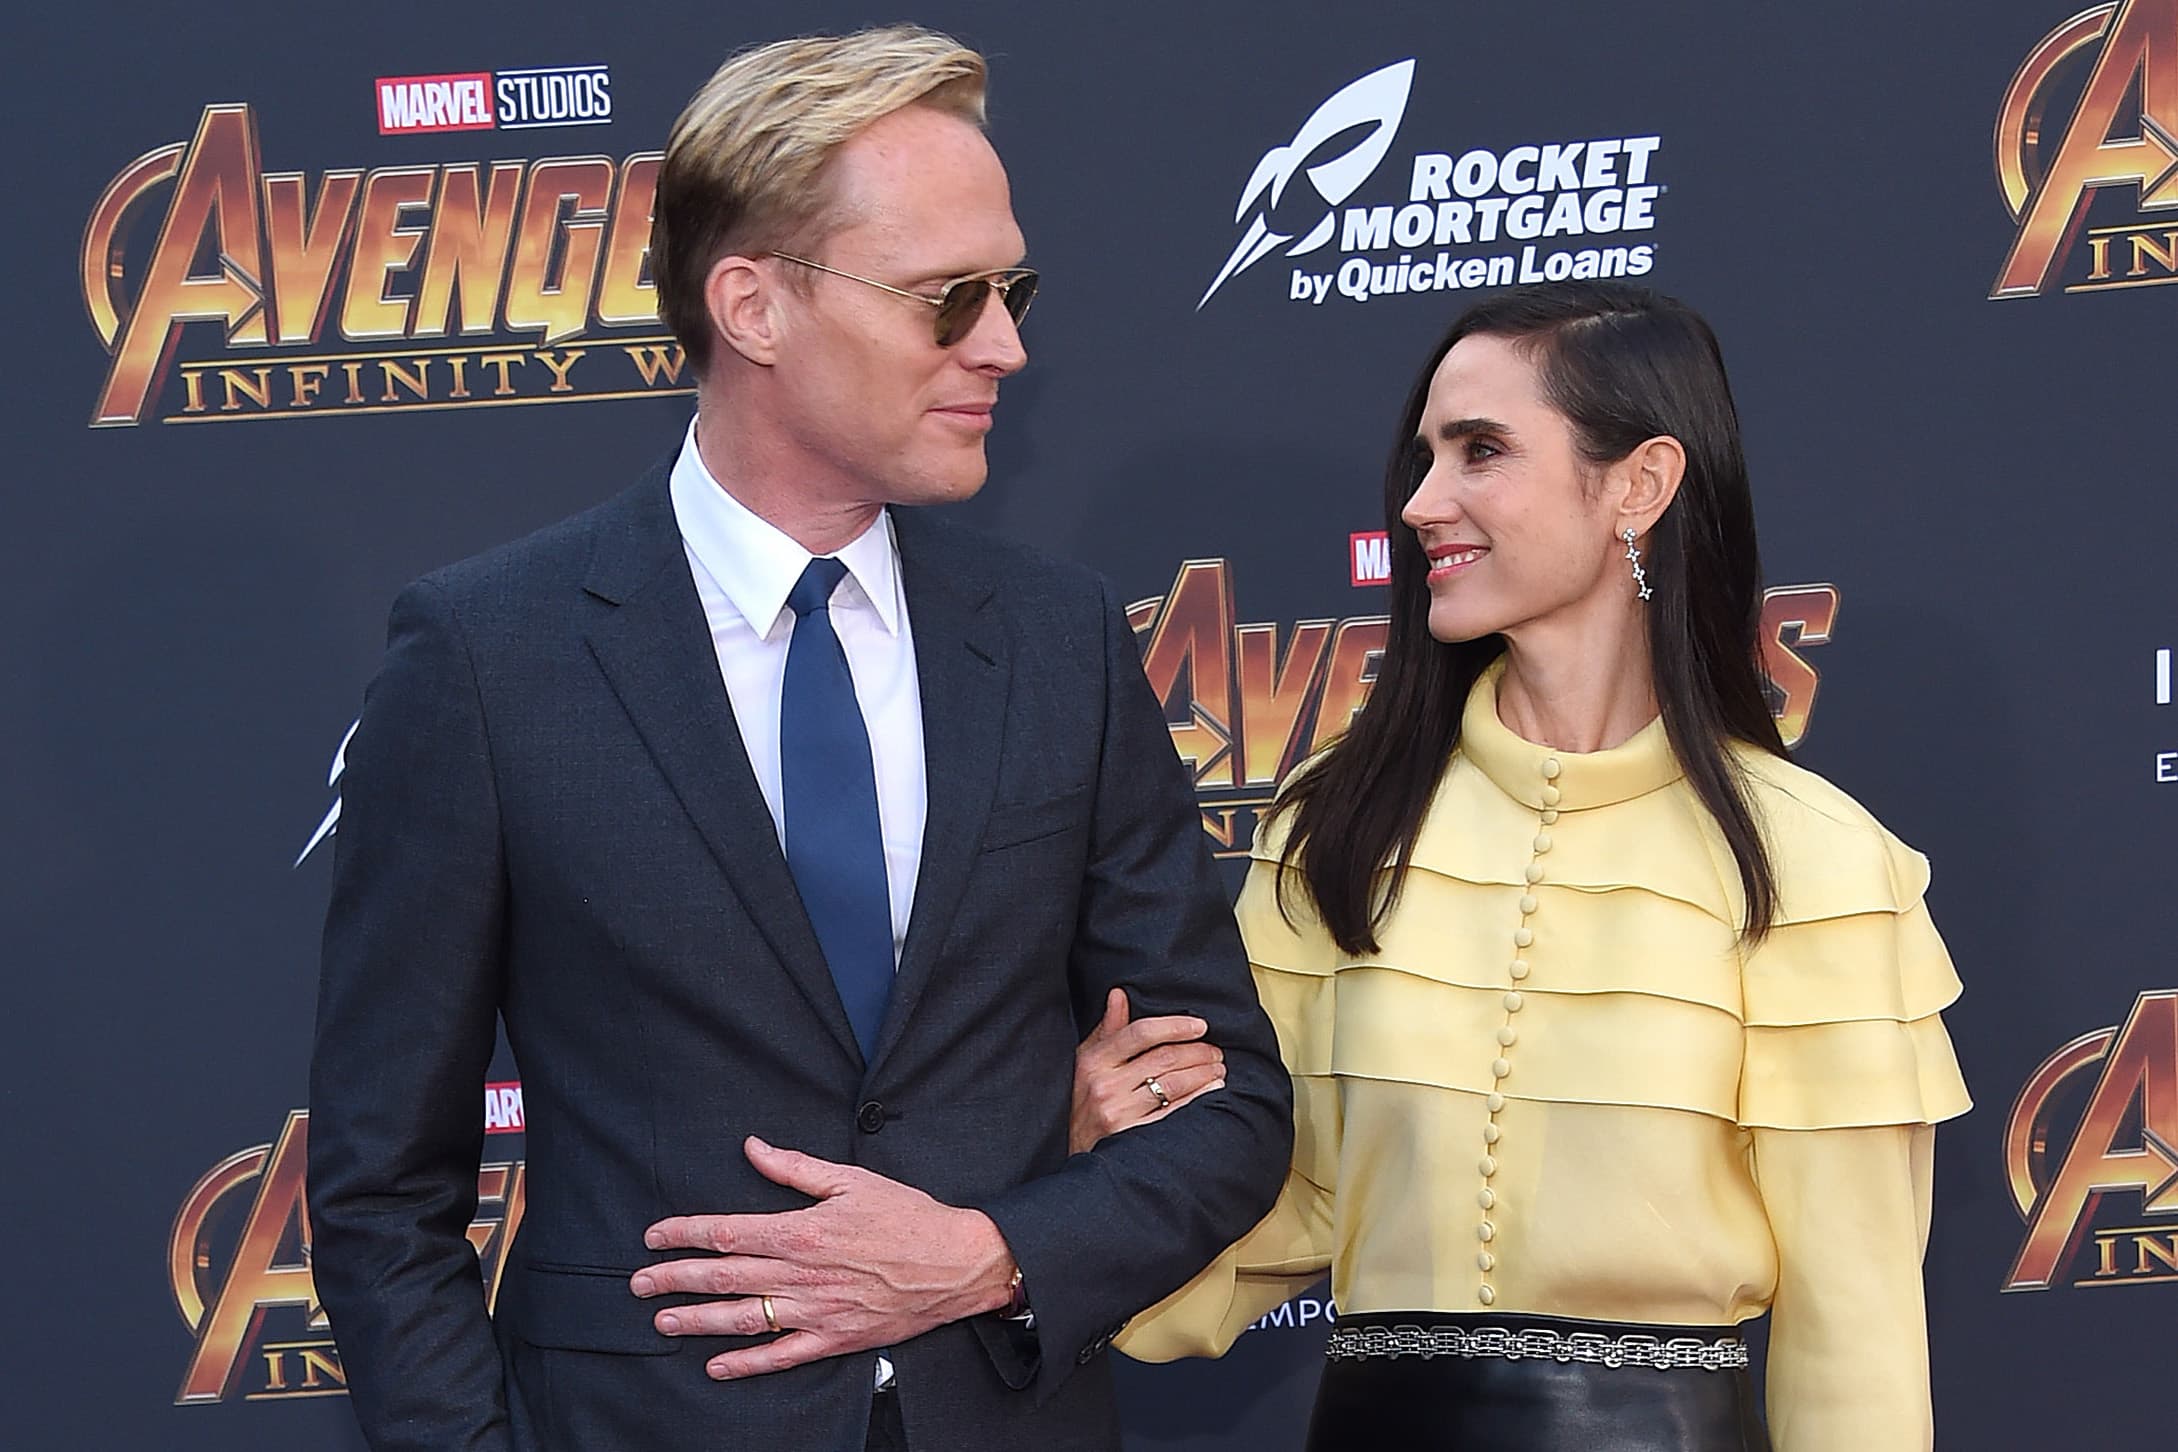 Jennifer Connelly Joins Instagram, Shares Photo Featuring Paul Bettany